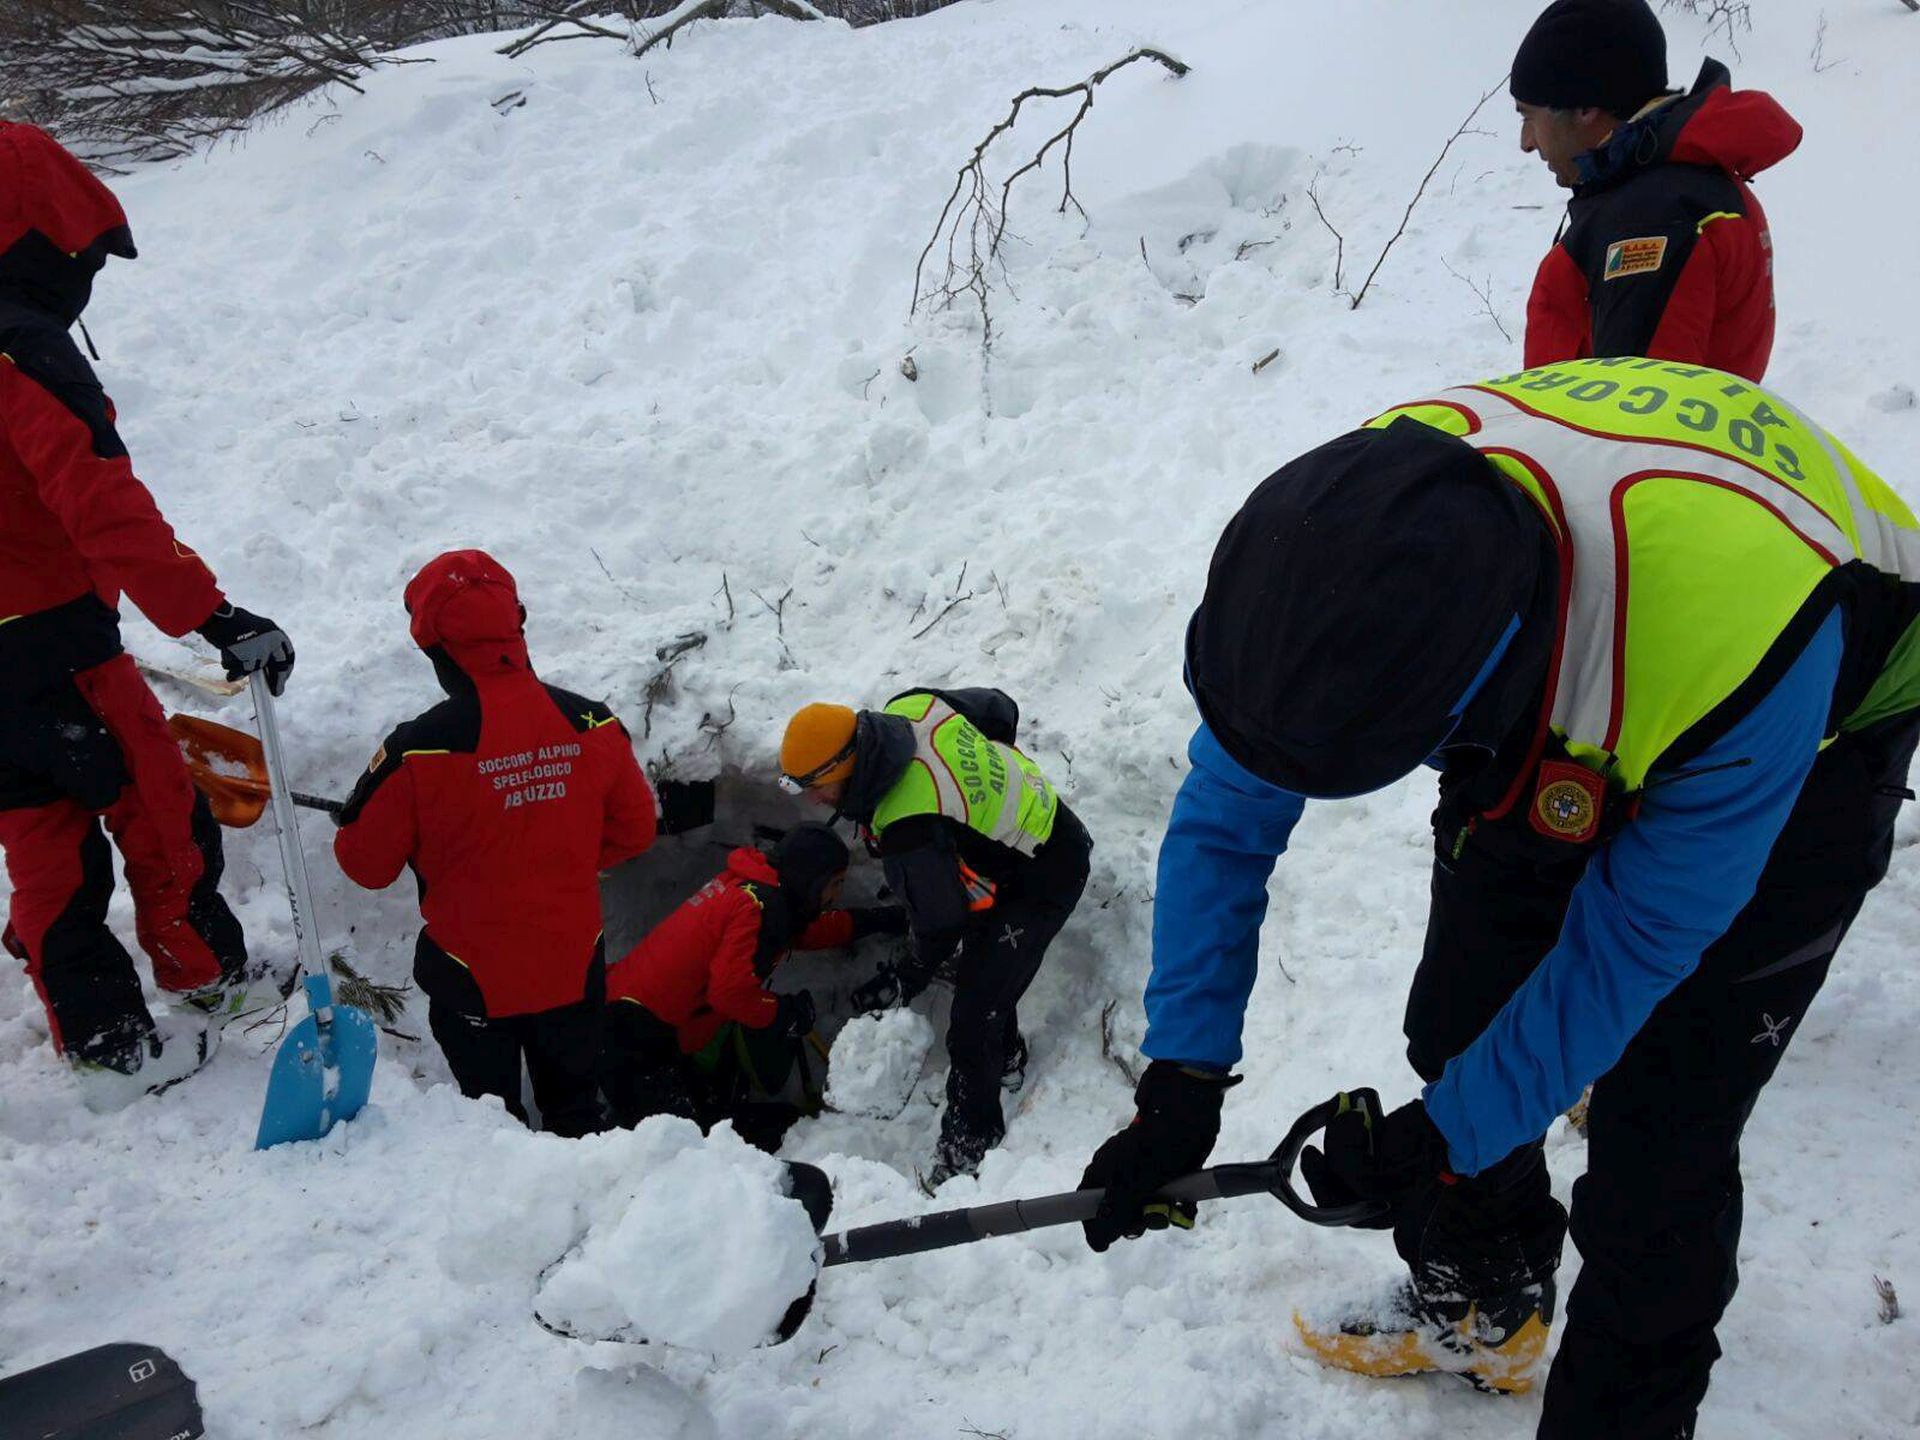 epa05731273 A handout picture provided by the Italian National Alpine Cliff and Cave Rescue Corps (CNAS) shows rescue operations at hotel Rigopiano after it was hit by an avalanche in Farindola (Pescara), Abruzzo region, early 19 January 2017. According to an Italian mountain rescue team, several people have been killed in an avalanche that has hit a hotel near the Gran Sasso mountain in Abruzzo region. Authorities believe that the avalanche was apparently triggered by a series of earthquakes in central Italy on 18 January.  EPA/ITALIAN MOUNTAIN RESCUE/CNAS HANDOUT BEST QUALITY AVAILABLE HANDOUT EDITORIAL USE ONLY/NO SALES